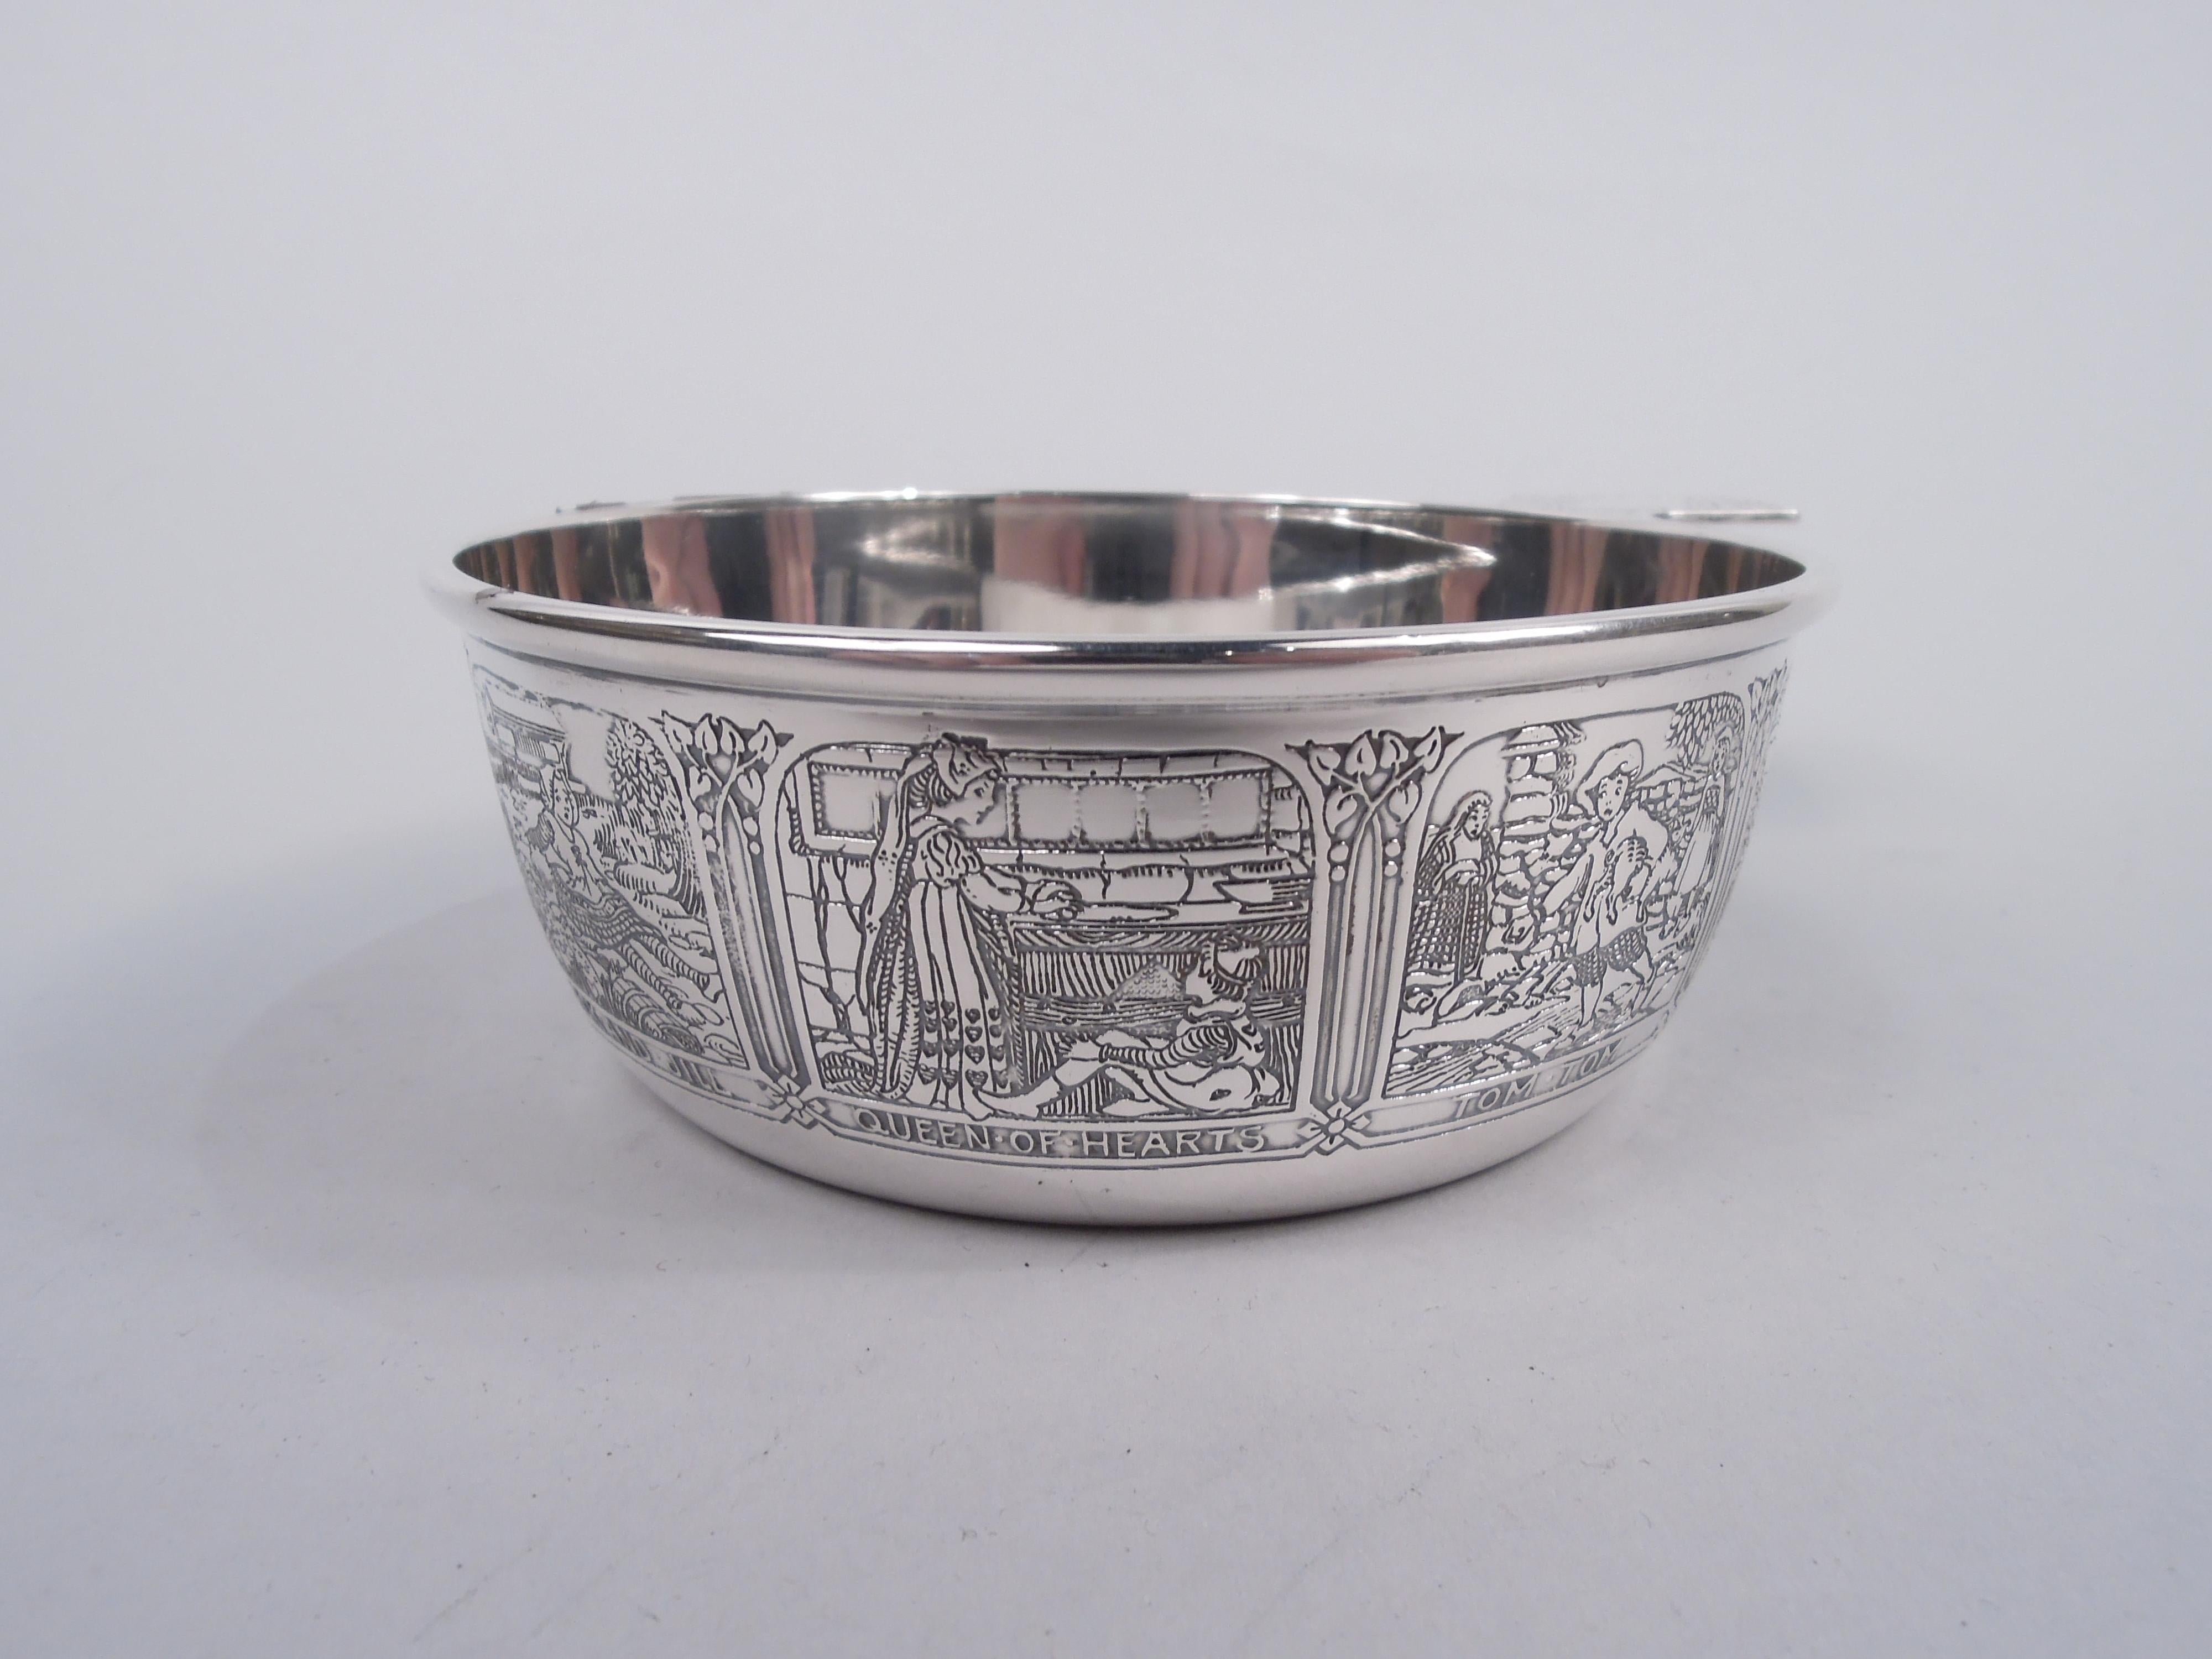 Edwardian sterling silver porringer. Made by R. Blackinton & Co. in North Attleboro, Mass., ca 1910. Round with solid lozenge-form handle. Acid-etched frames depicting nursery rhymes with both old favorites like Humpty Dumpty and Little Miss Muffet